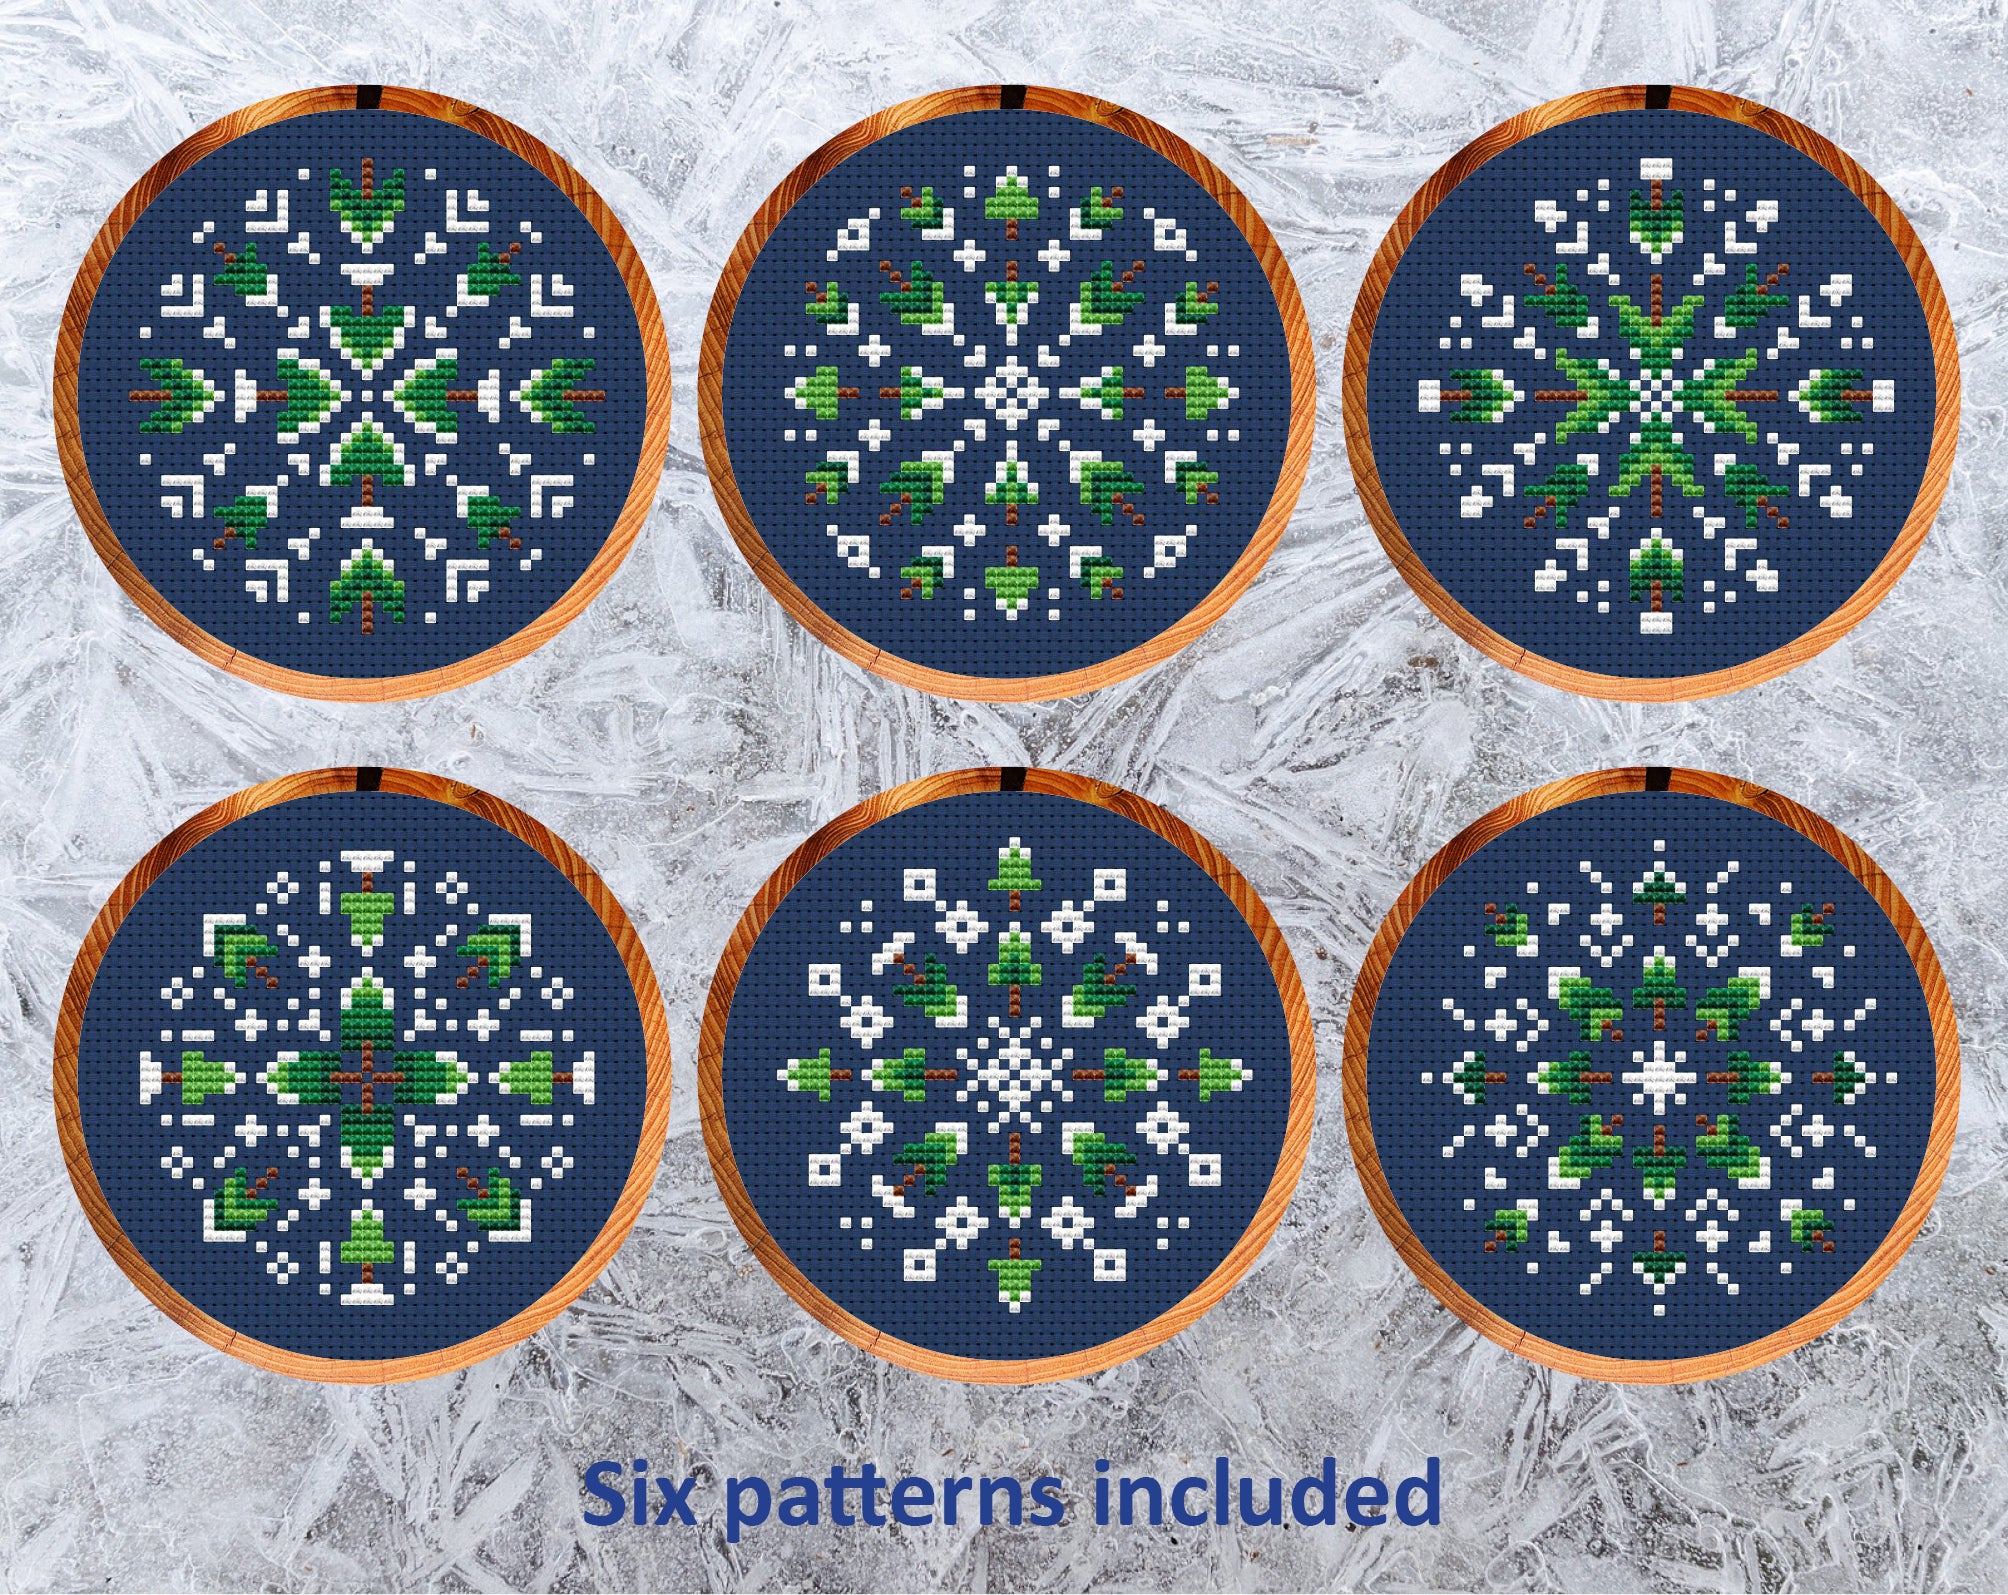 Christmas Tree Snowflakes cross stitch patterns. Fun snowflakes designs with mini Christmas trees within them. Six patterns included.